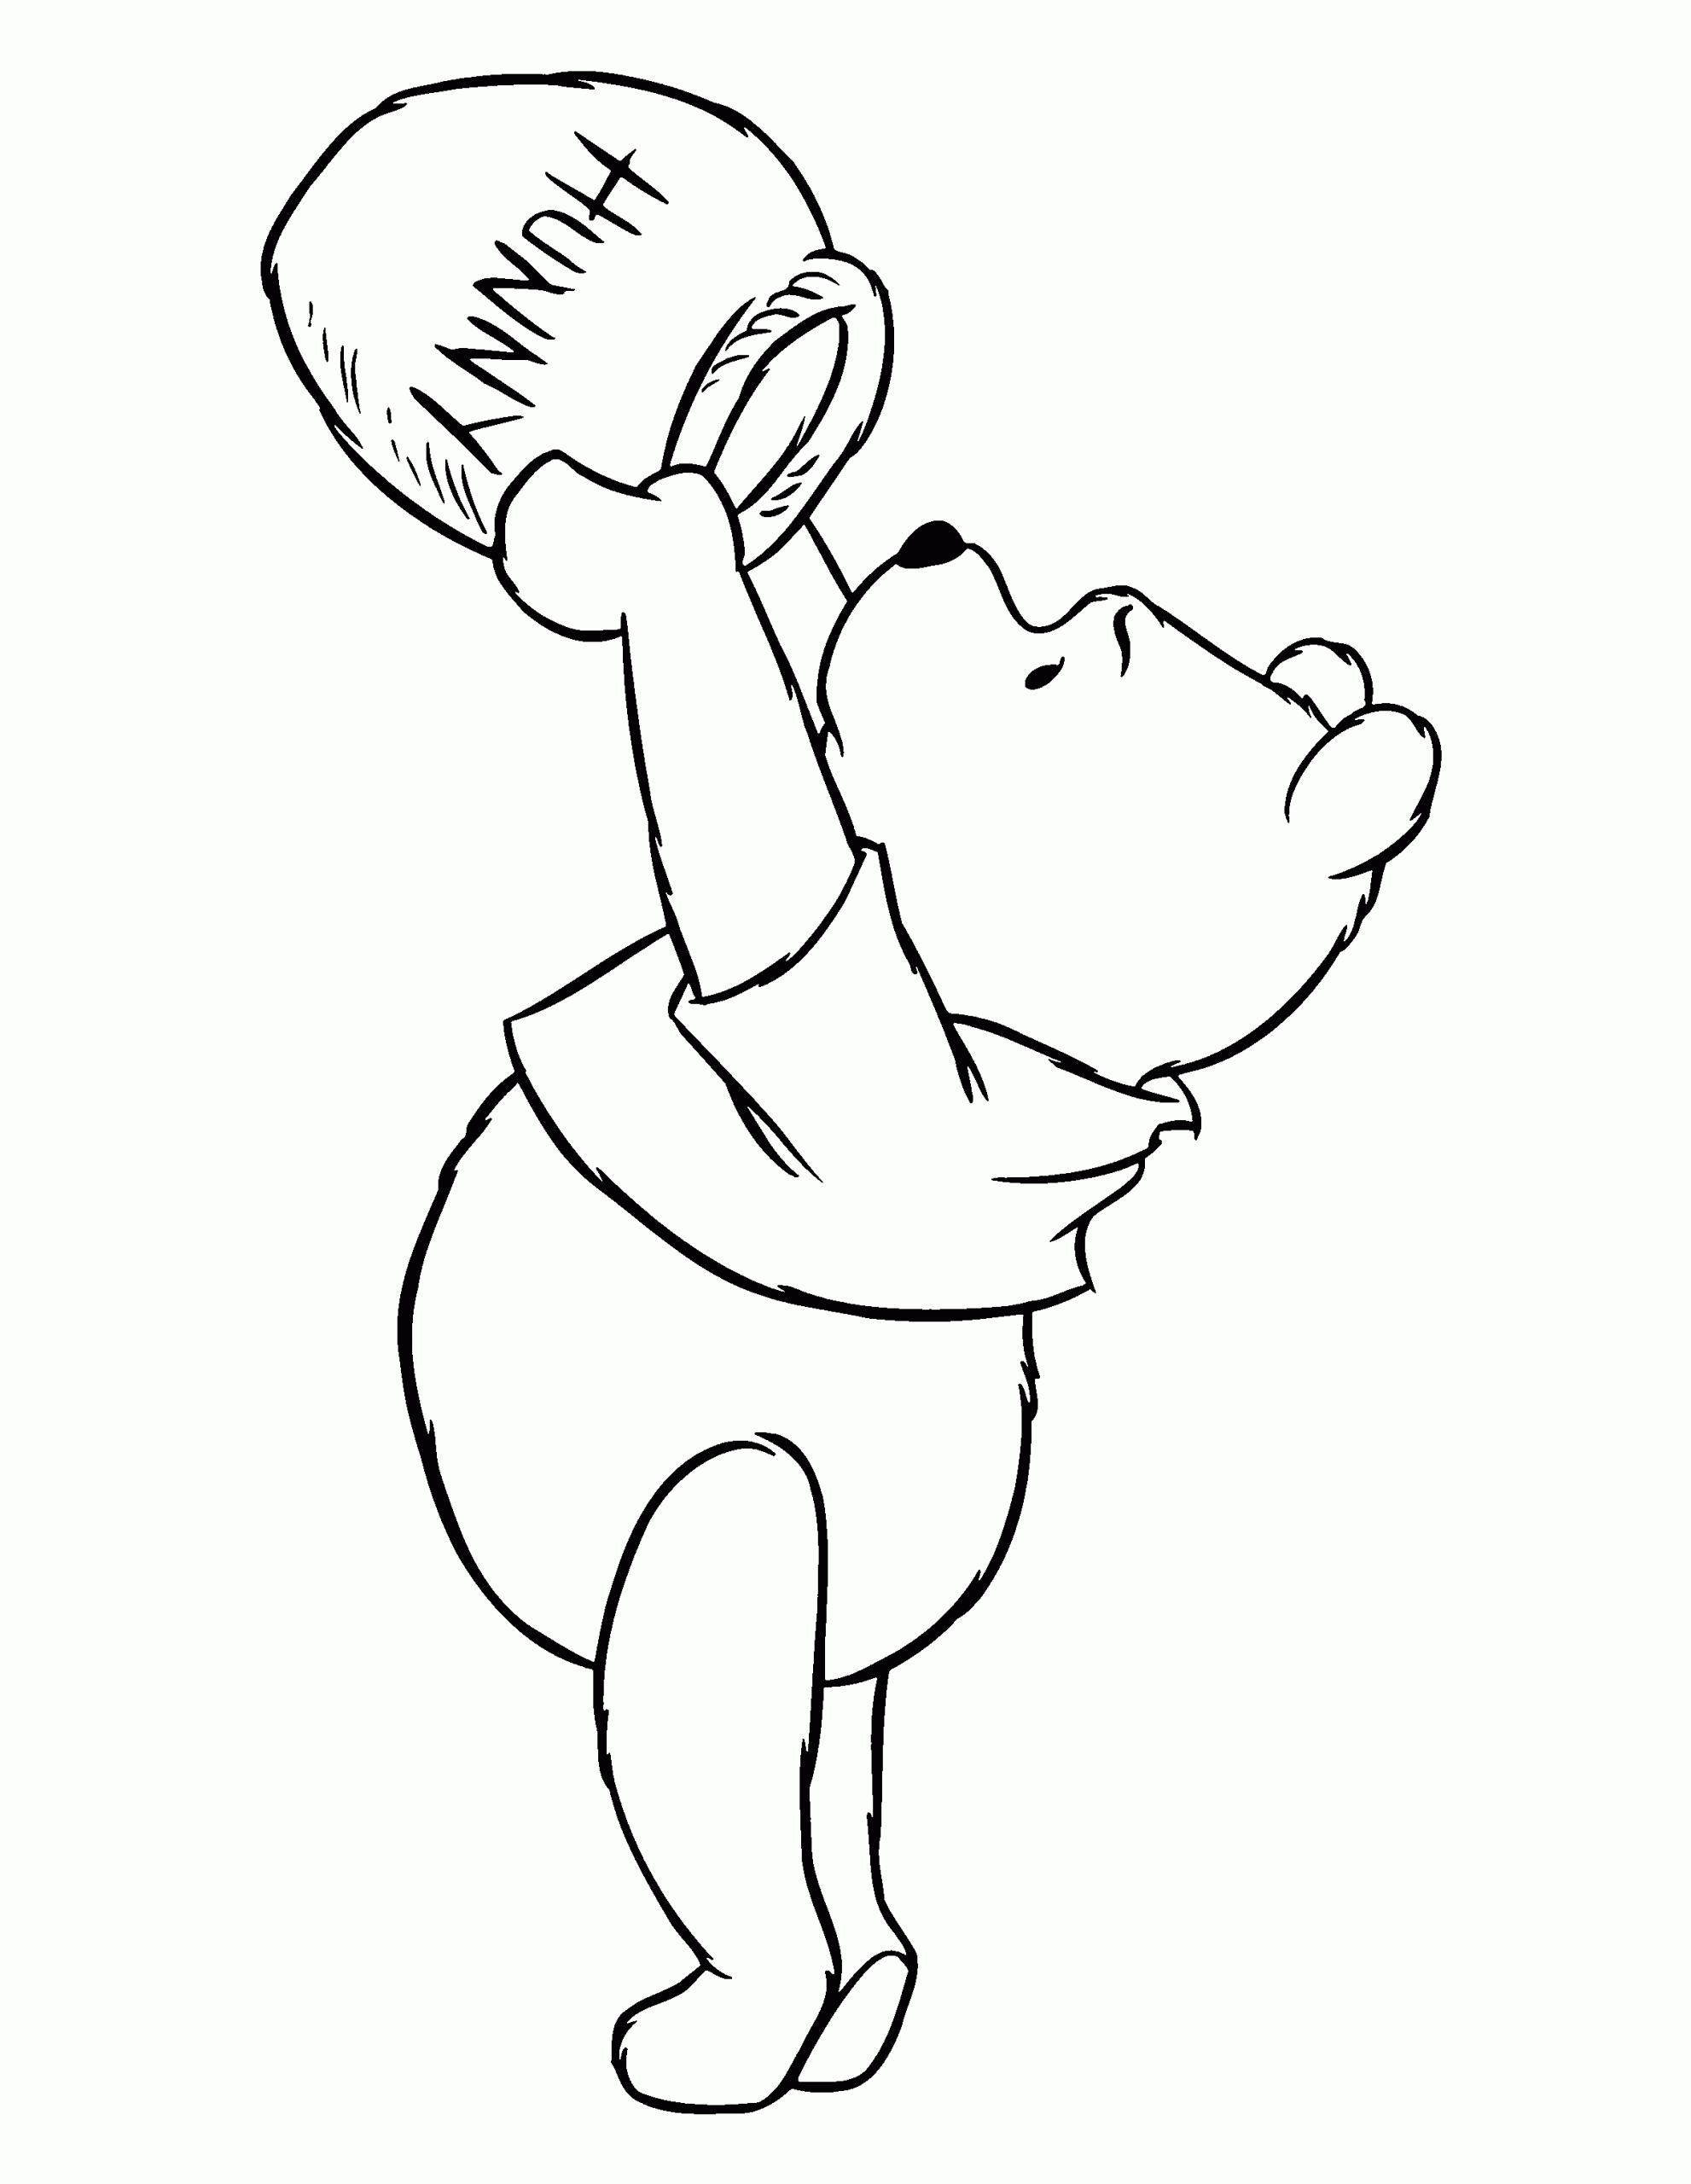 Thirsty Baby Winnie The Pooh Coloring Page